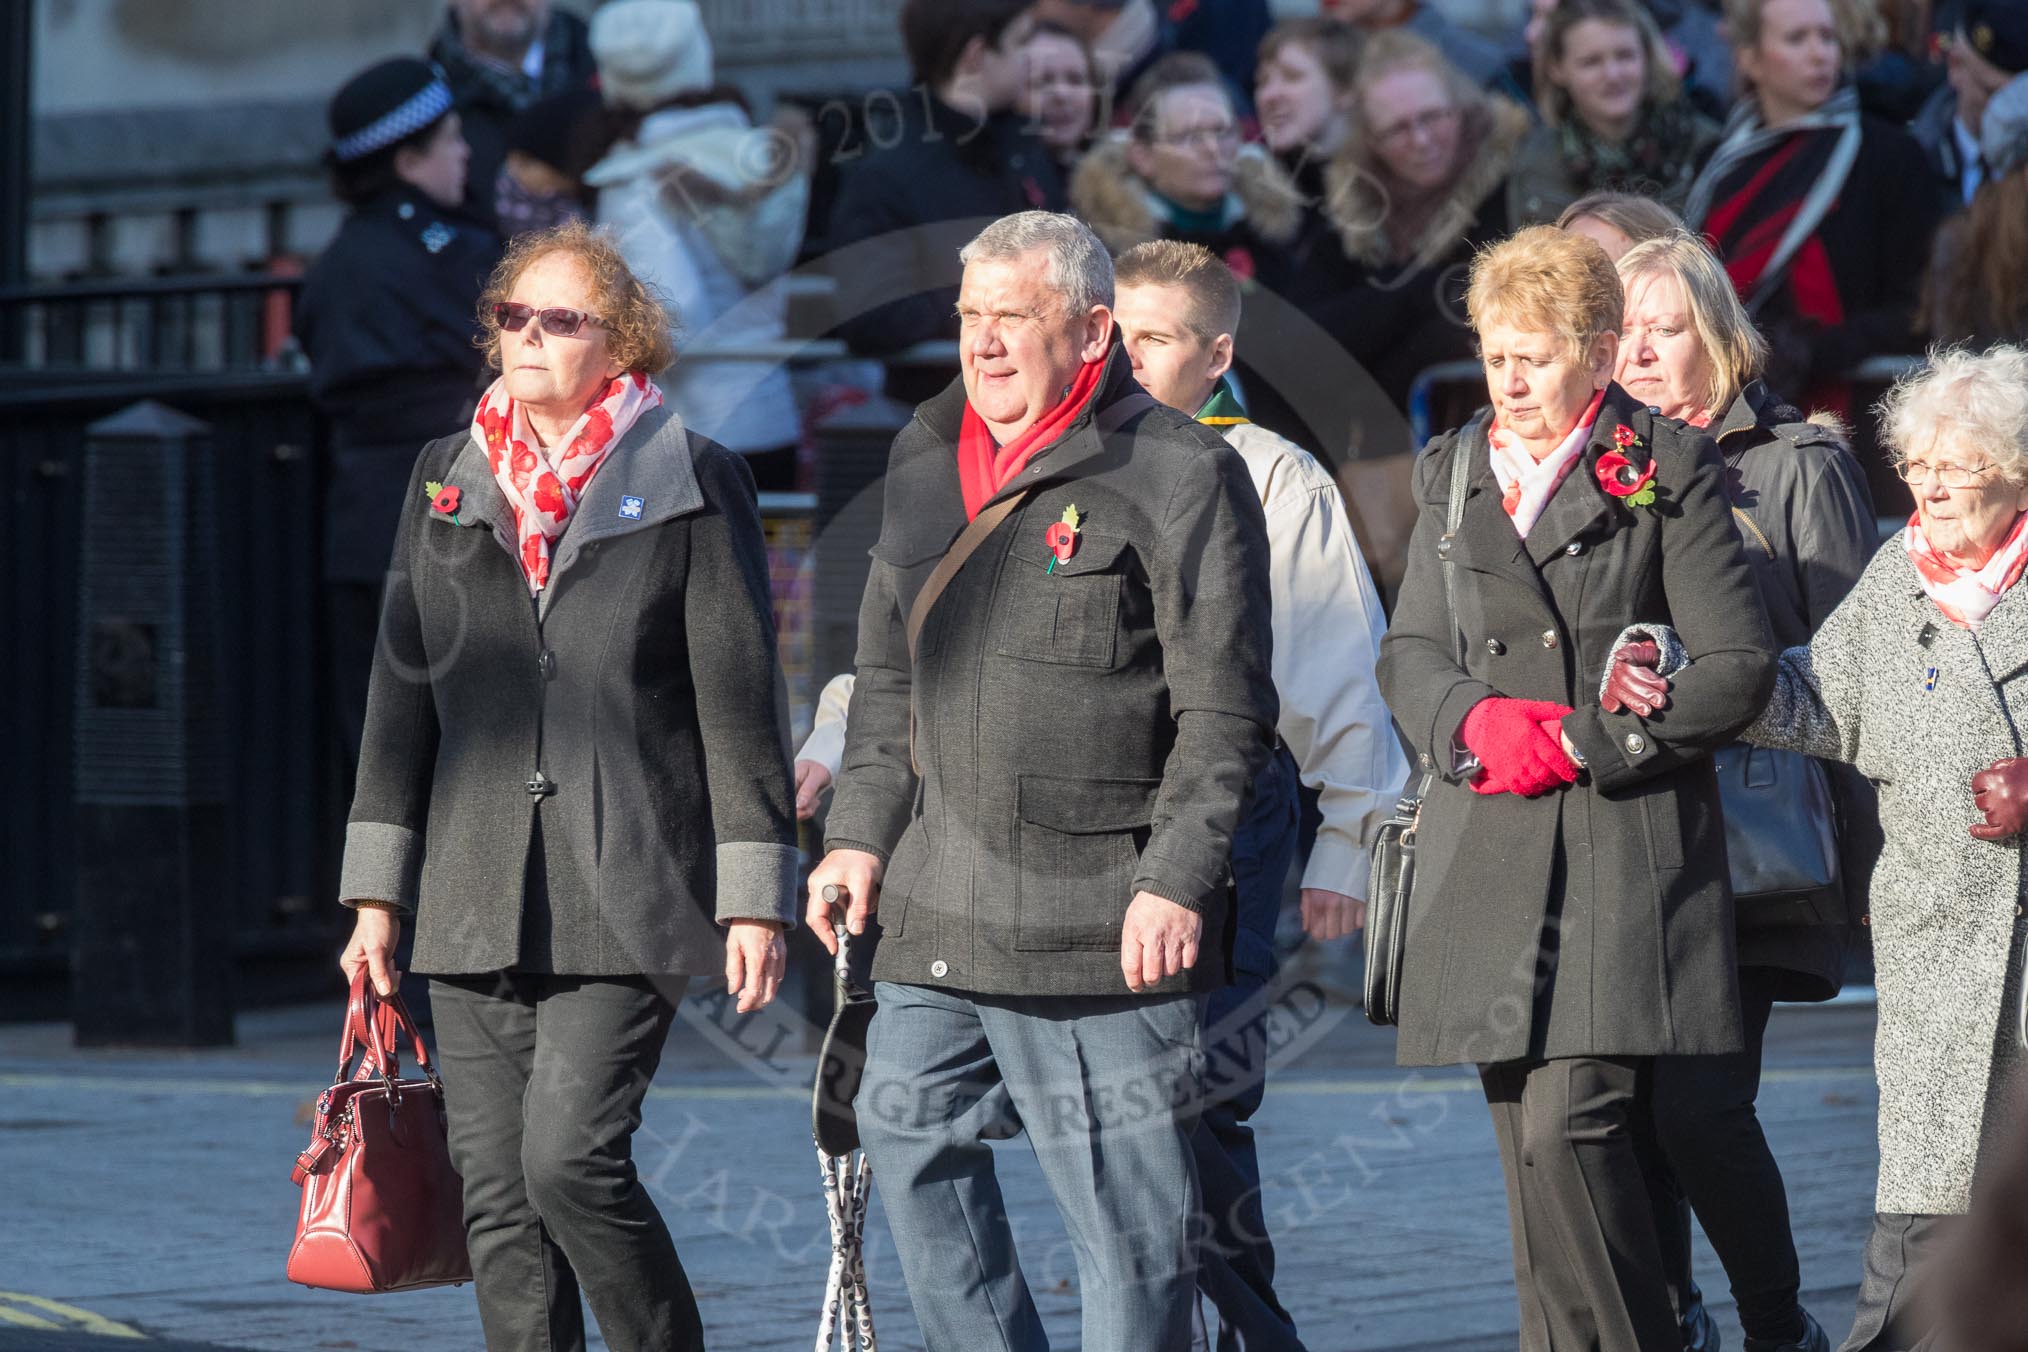 March Past, Remembrance Sunday at the Cenotaph 2016: M49 The British Evacuees Association.
Cenotaph, Whitehall, London SW1,
London,
Greater London,
United Kingdom,
on 13 November 2016 at 13:20, image #3027